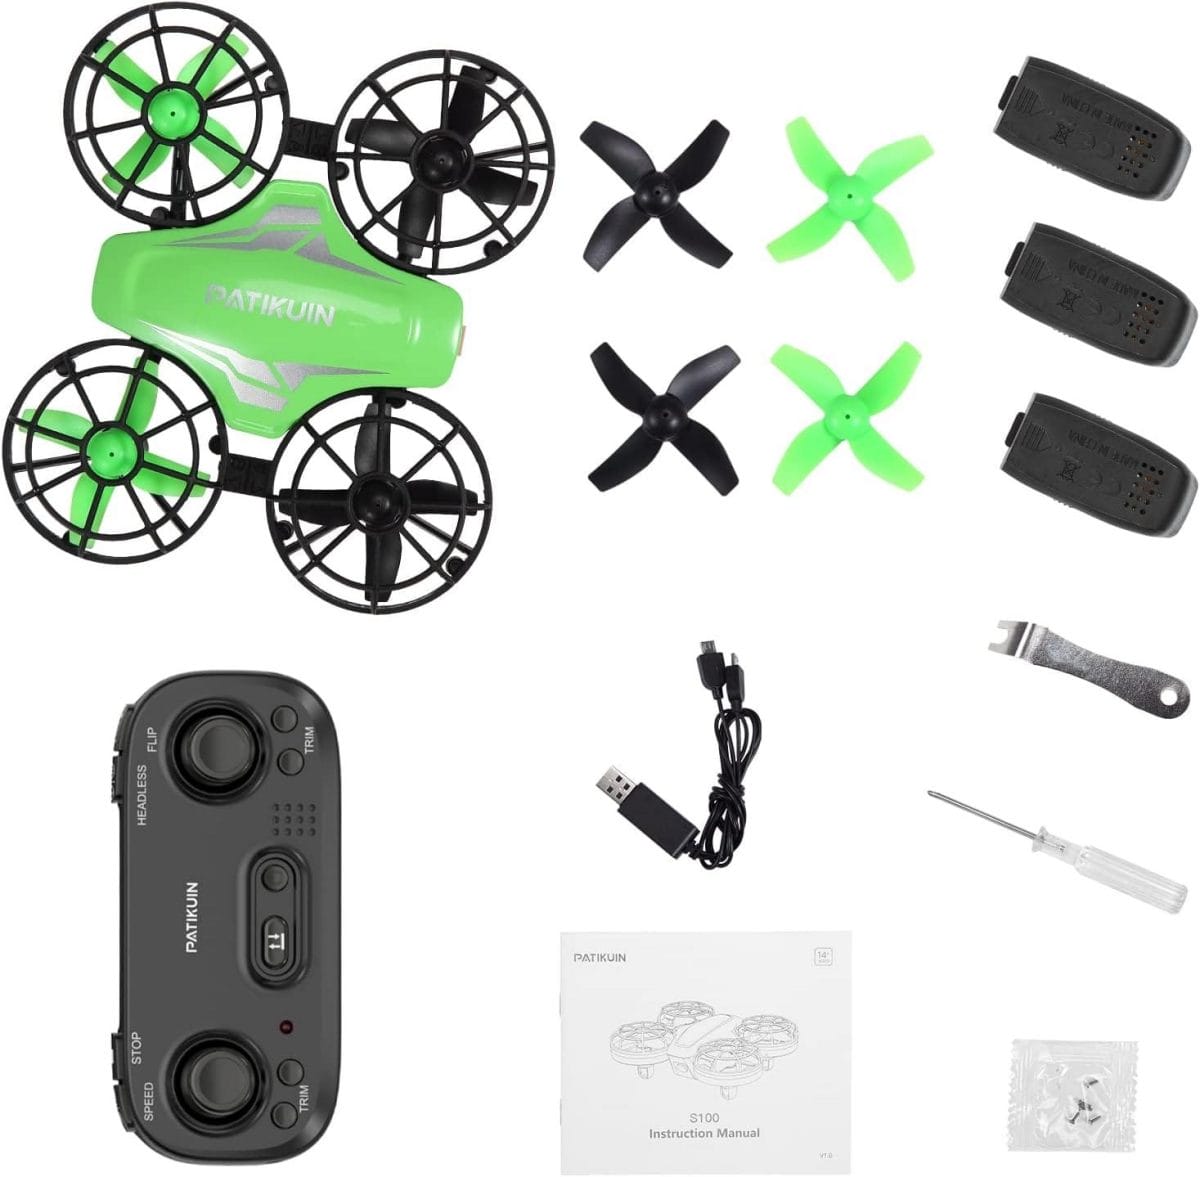 Mini Drone for Kids and Beginners, Remote Control Helicopter Quadcopter with 3 Modular Batteries, Headless Mode, Auto Hovering, 3 Speed Modes, Indoor RC Pocket Plane Gift for Boys and Girls, Green